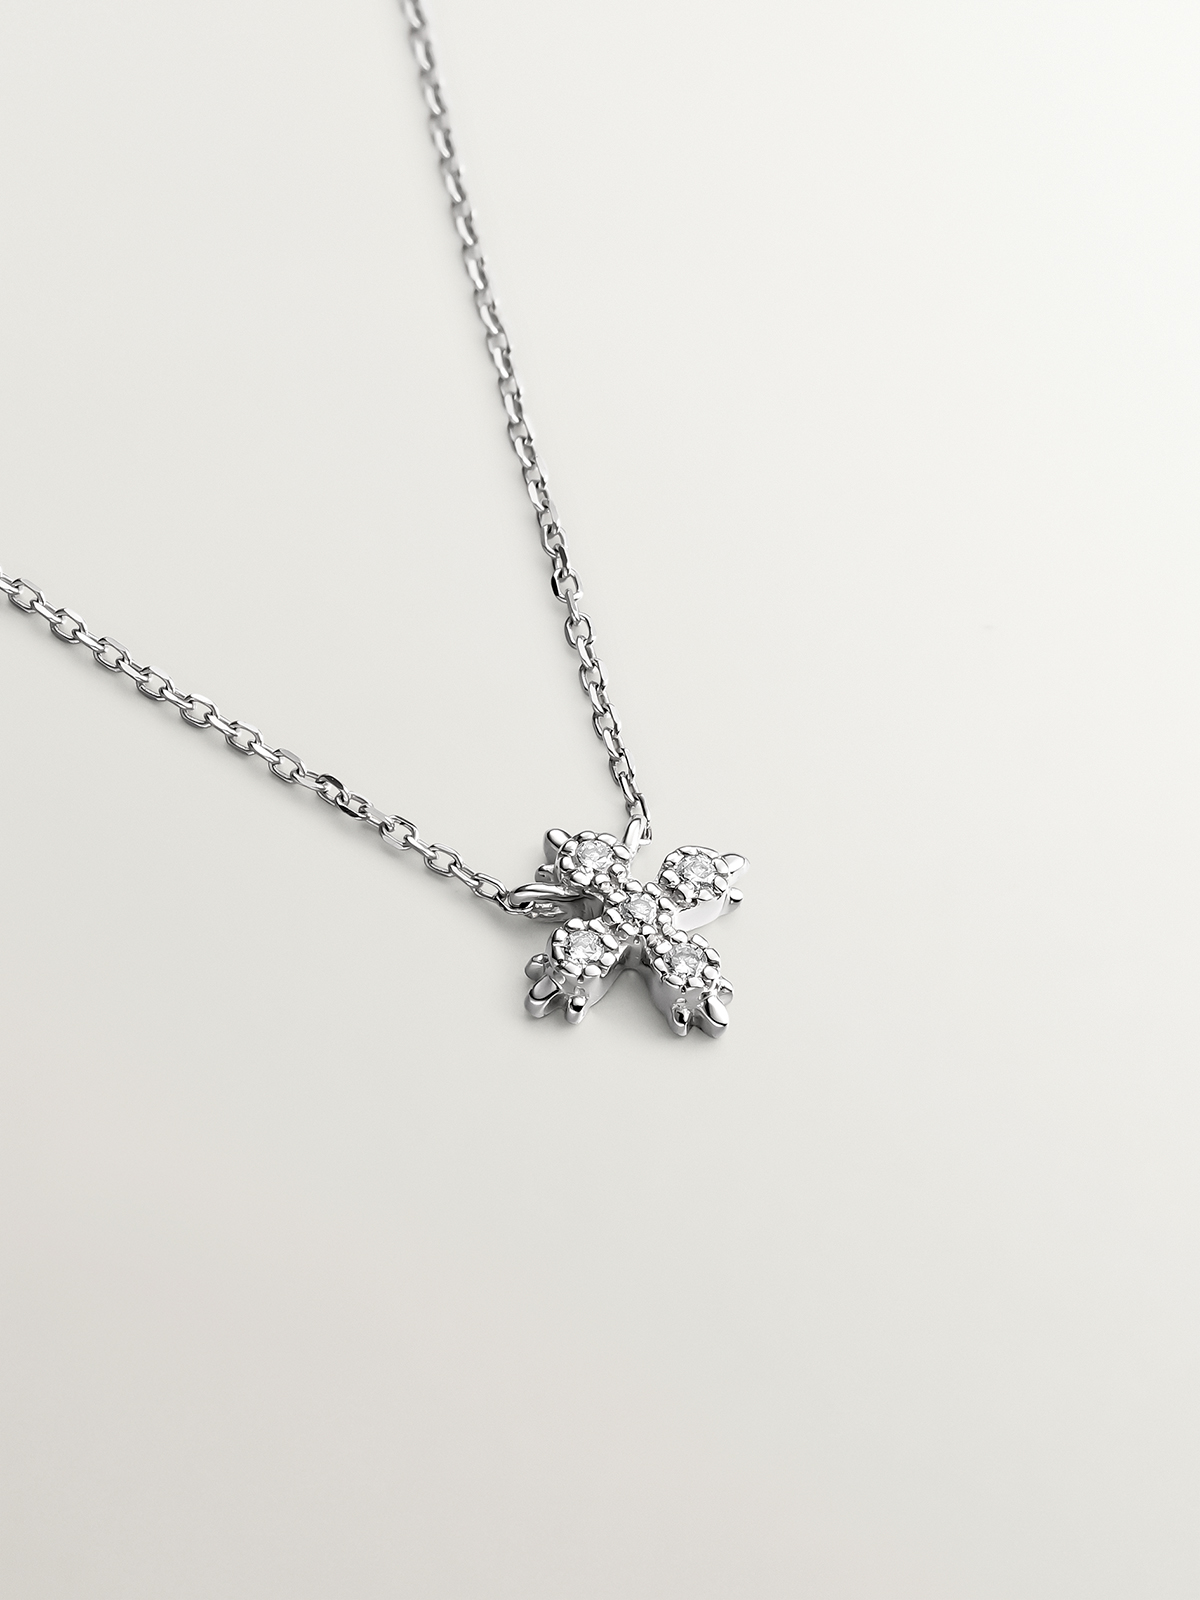 18K white gold pendant with cross featuring white diamonds.